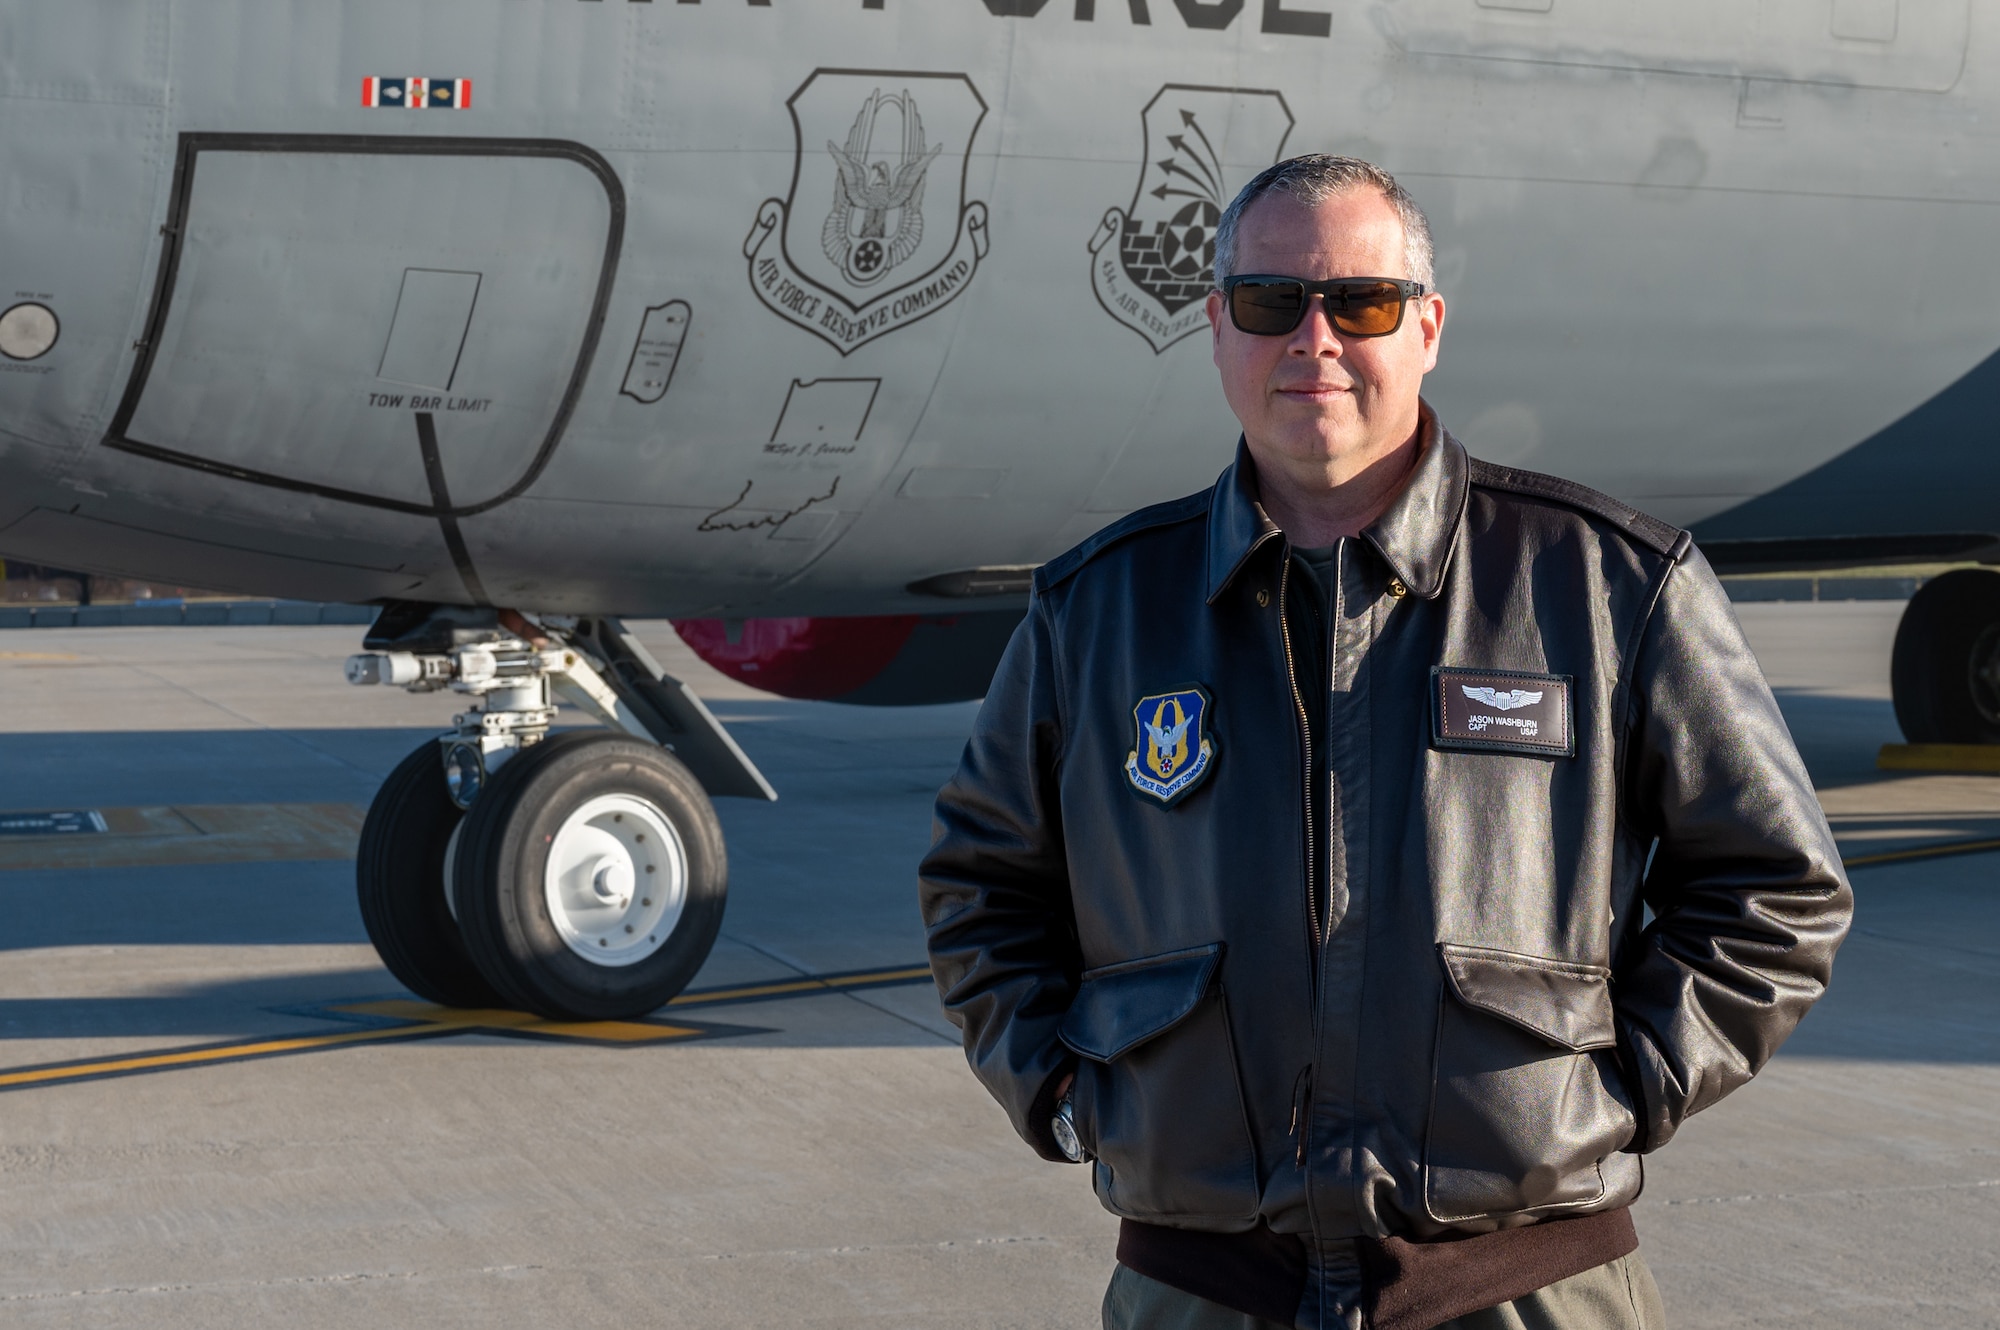 A man in a leather jacket and sunglasses poses for a photo in front of a plane. The plane has two patch decals visible, one for Air Force Reserve Command and the other for the 434th Air Refueling Wing.